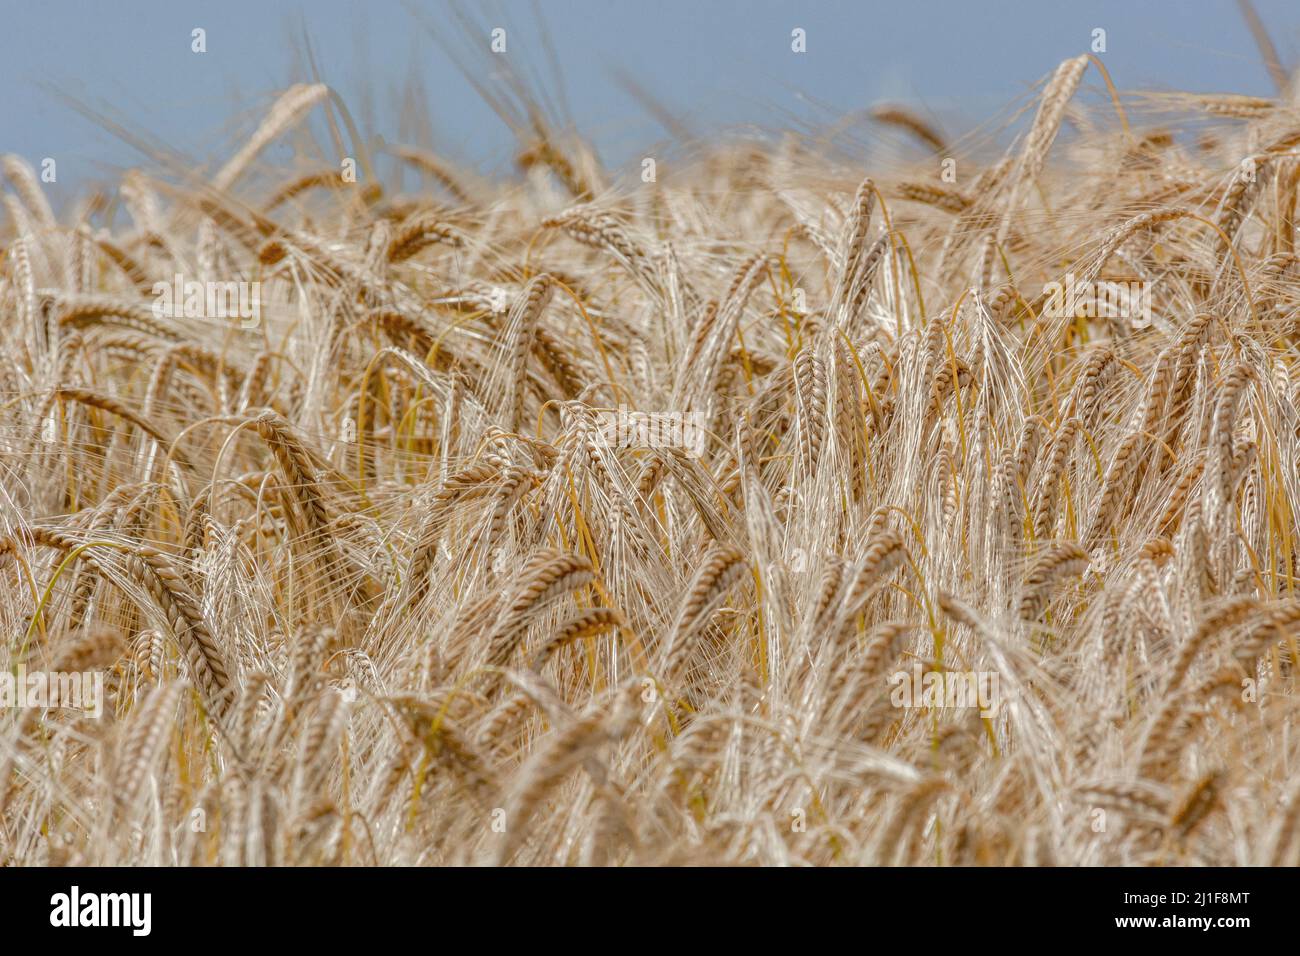 Ears of ripening barley / Hordeum vulgare in a cereal cropped field. Visual metaphor for concept of famine, food security, food supply UK. Stock Photo